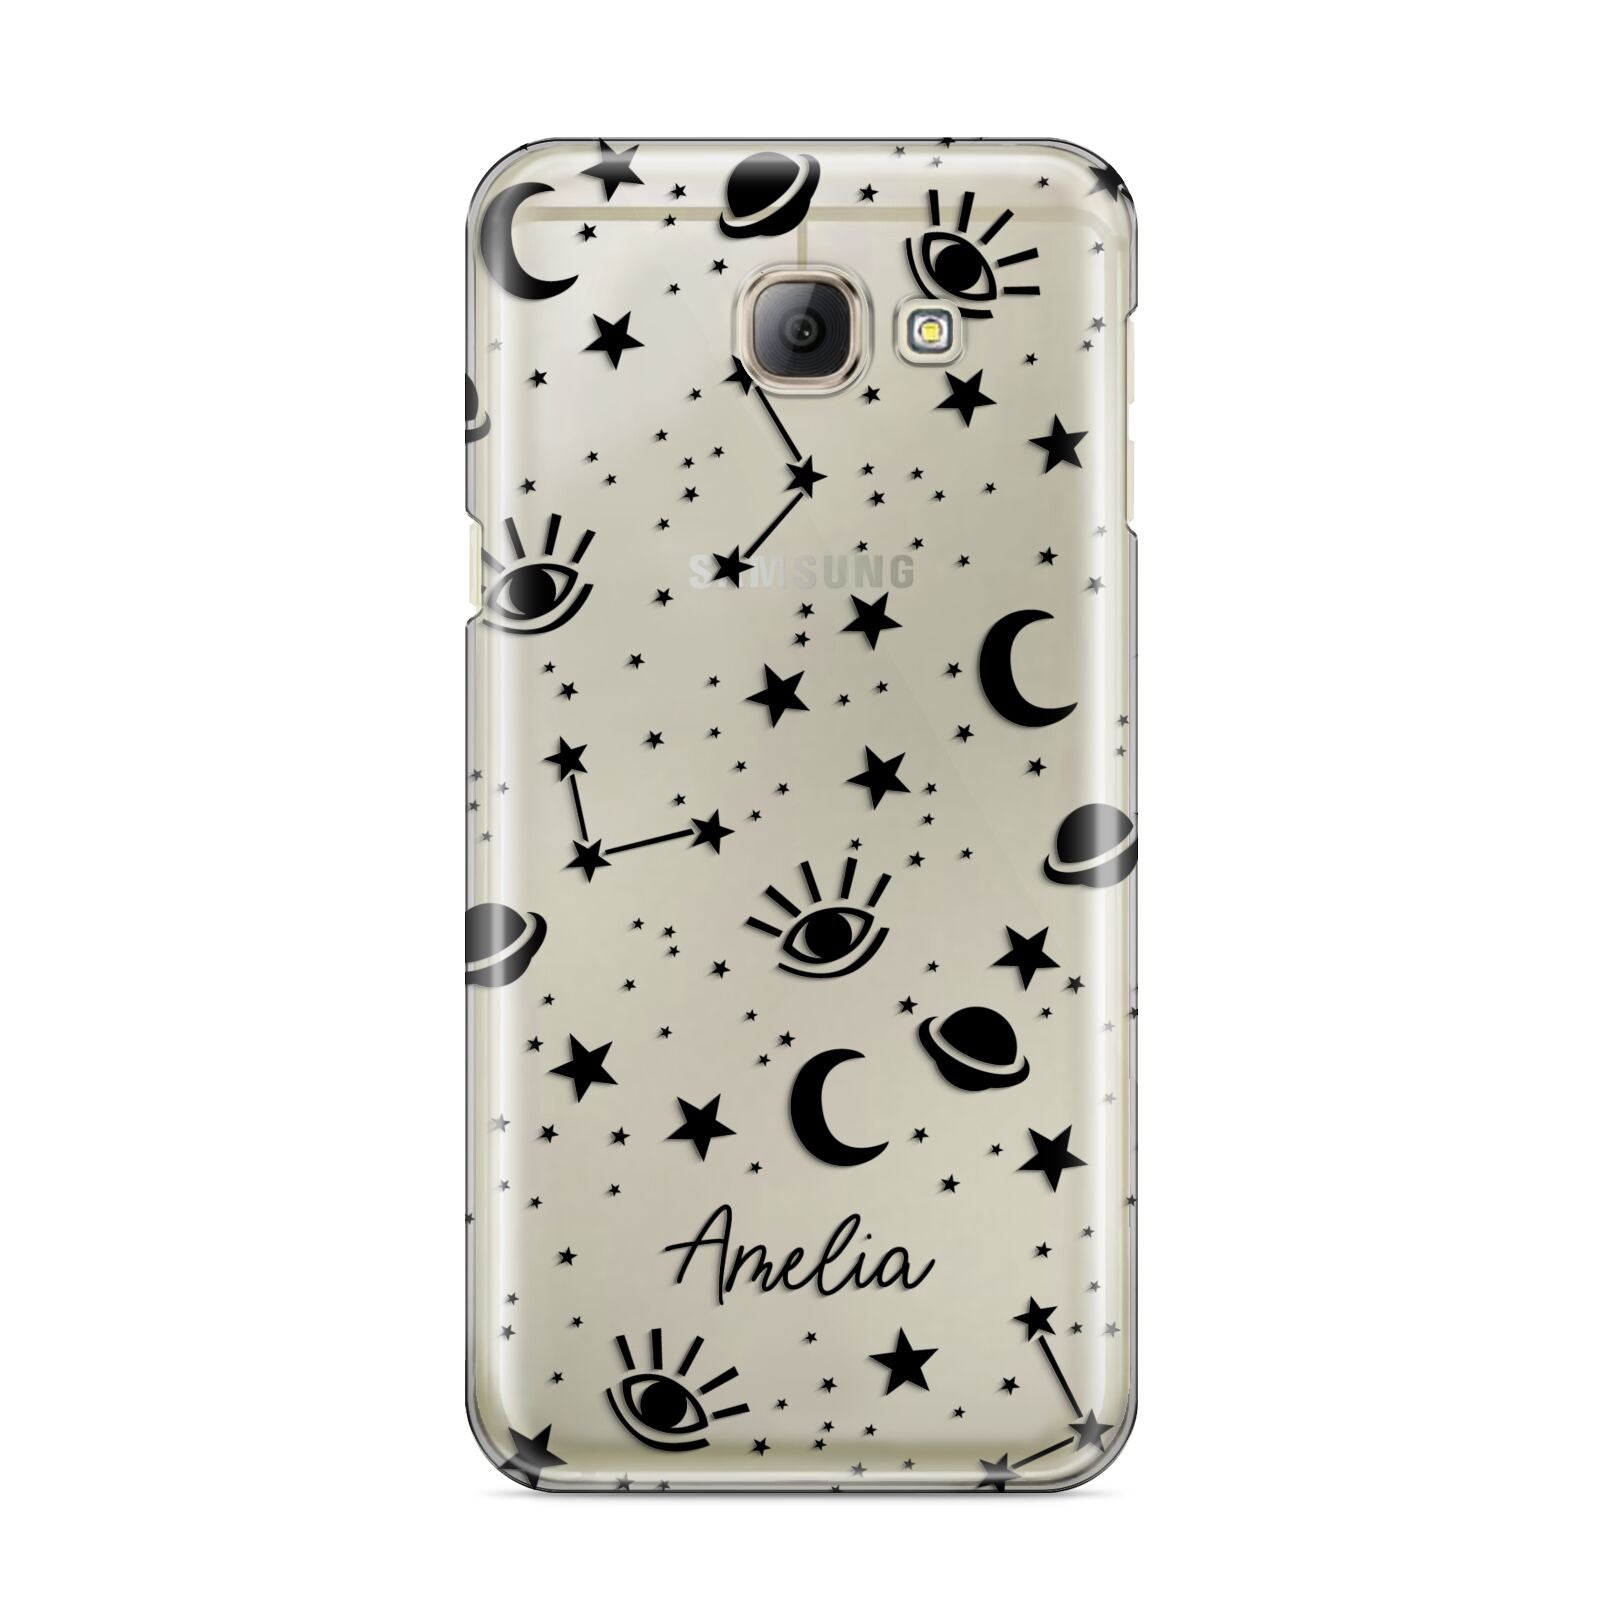 Monochrome Zodiac Constellations with Name Samsung Galaxy A8 2016 Case